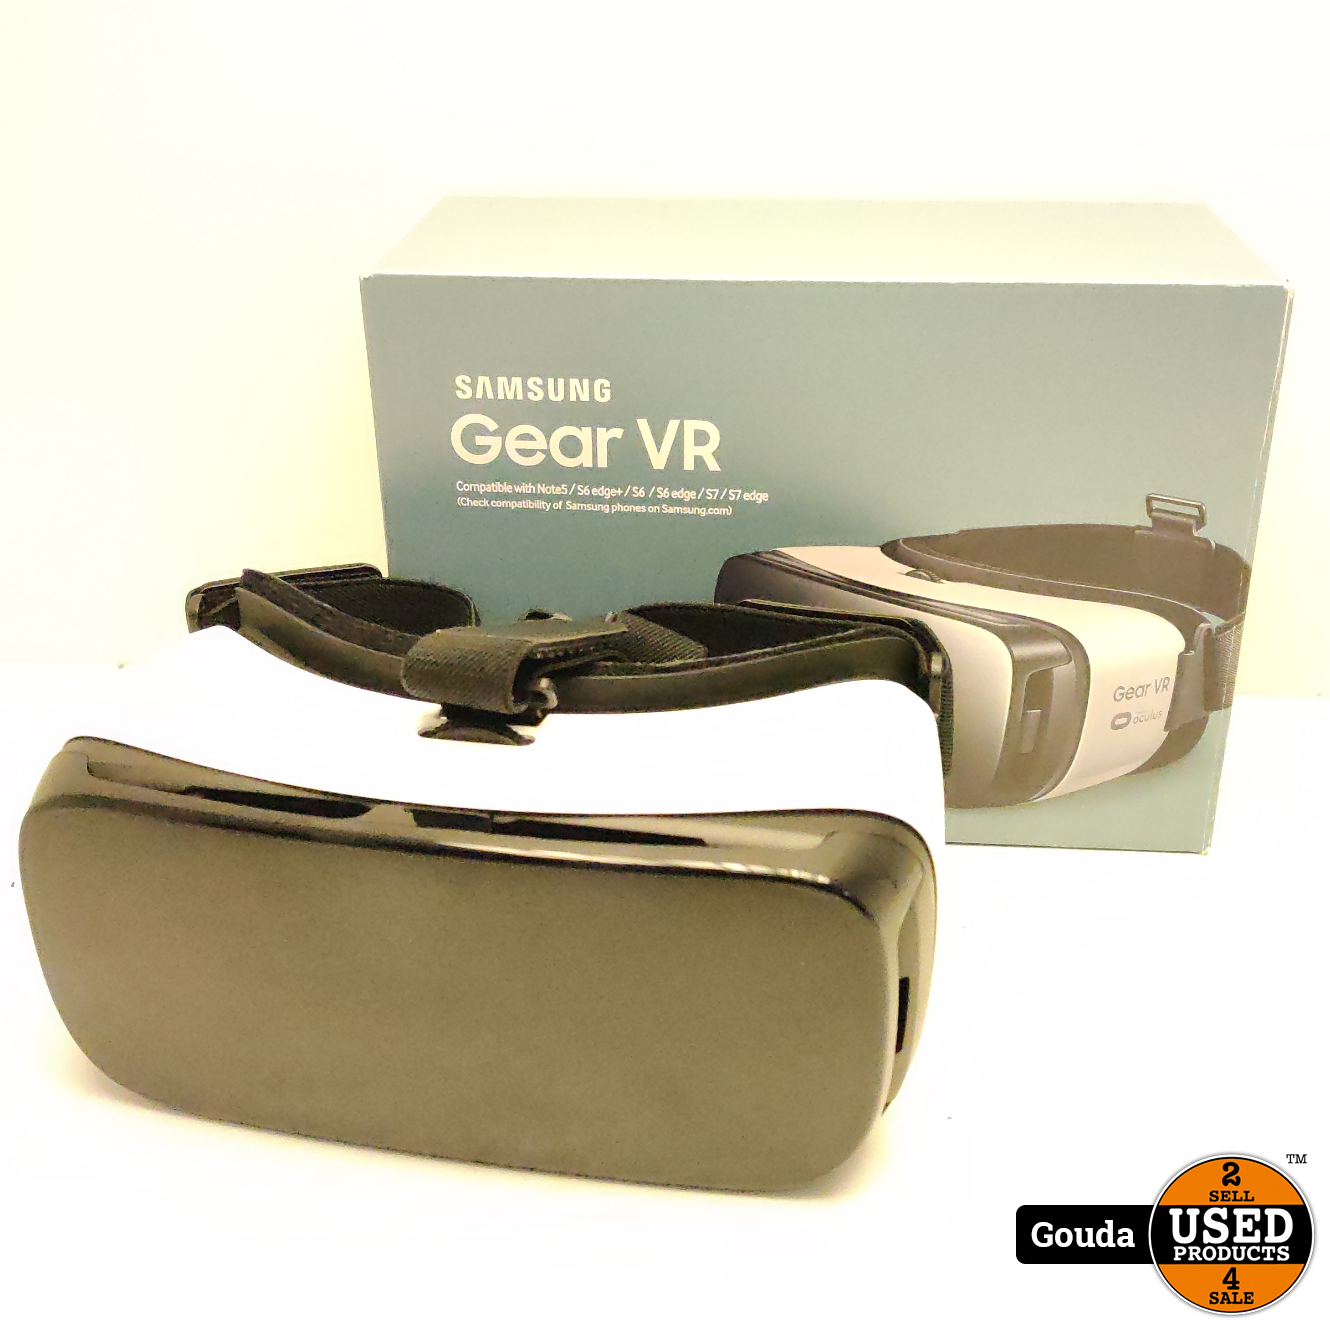 auteur Inspecteren huis Samsung Gear Vr - Vr bril - Used Products Gouda